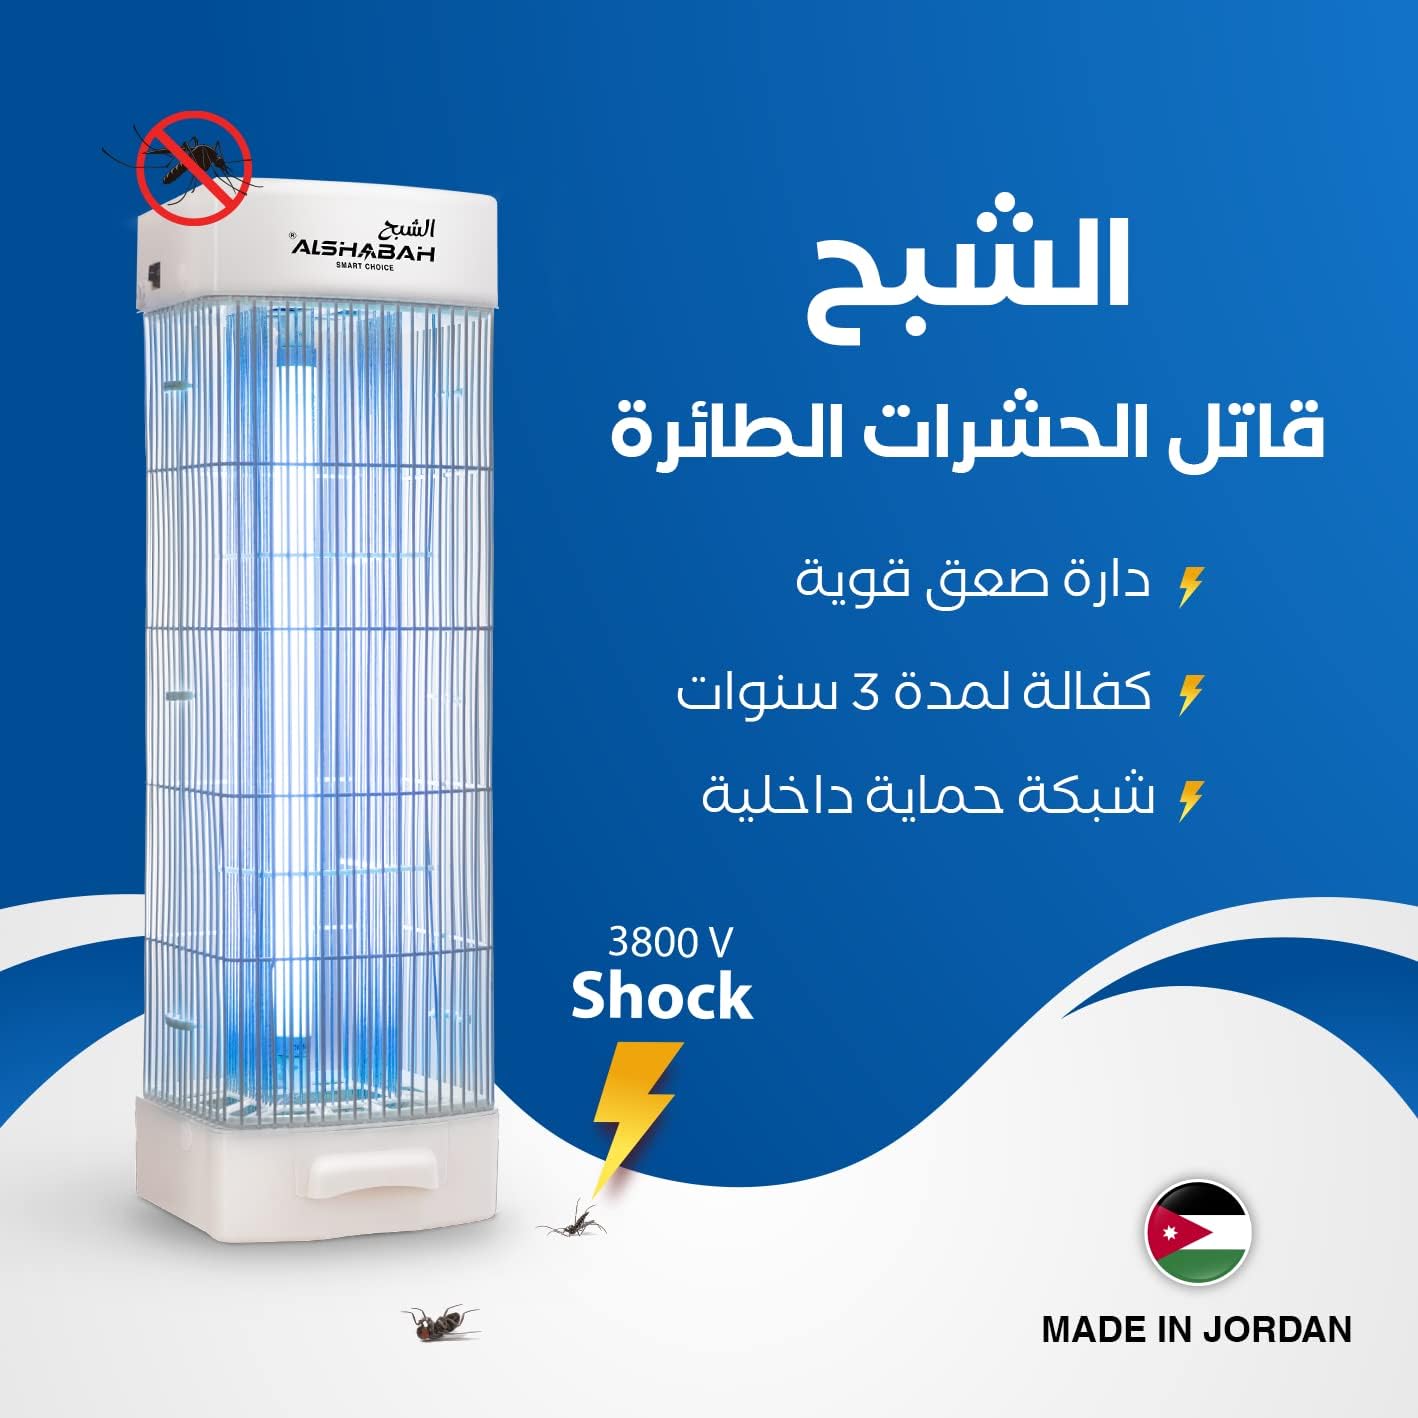 AL SHABAH flying insects killer - the best bugg zapper - Mosquitos & flys trap-indoor & outdoor use - kills flying Insects